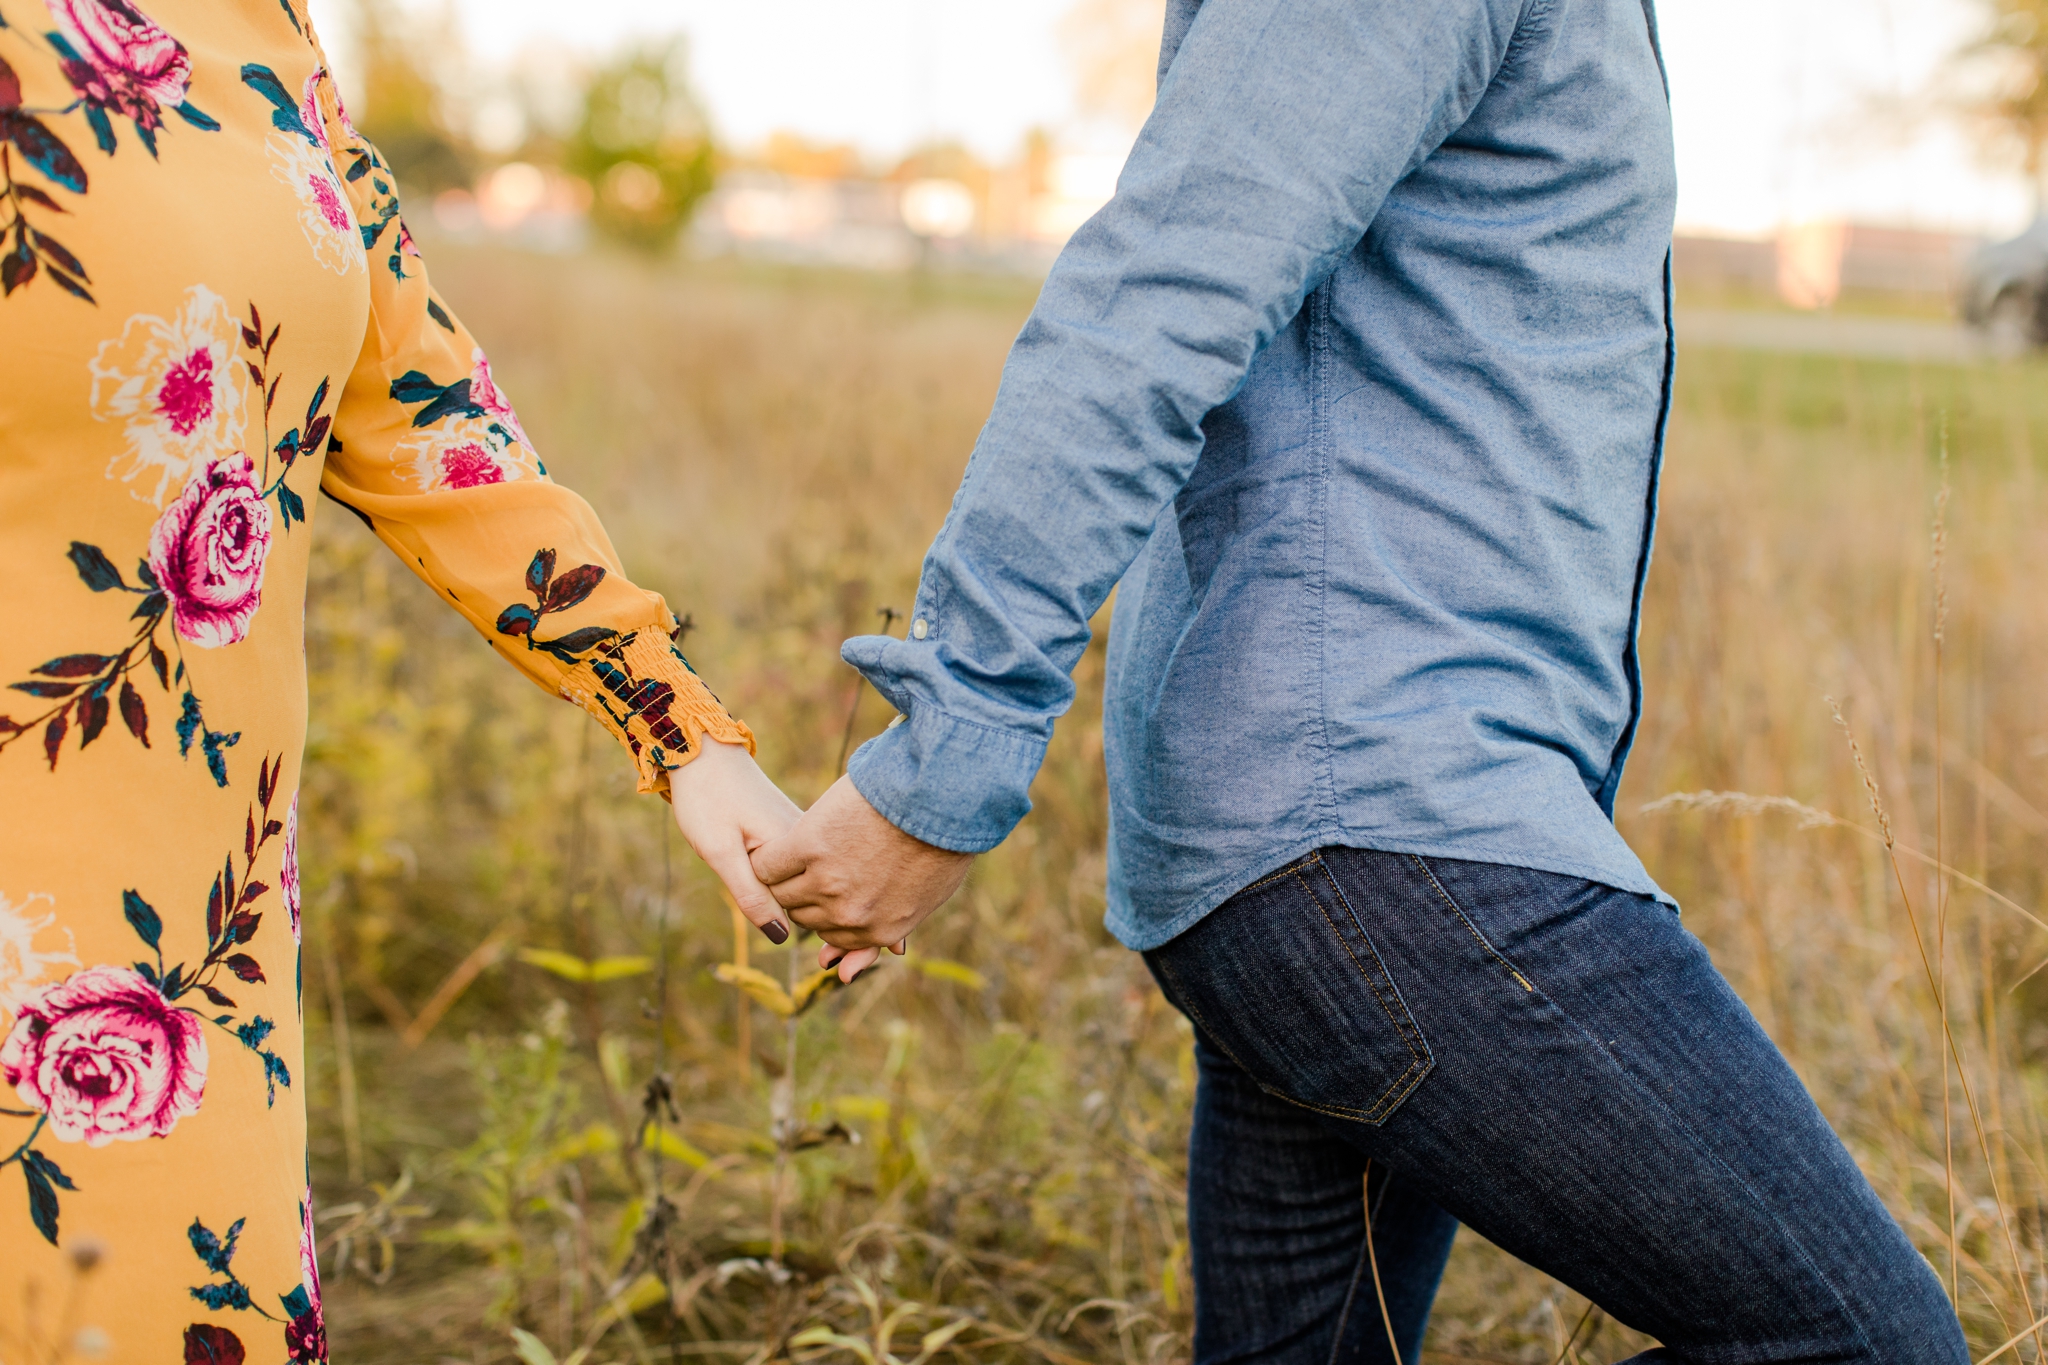 Detroit Lakes Engagement Photographers, Fall engagement photos, Brittney and Caleb